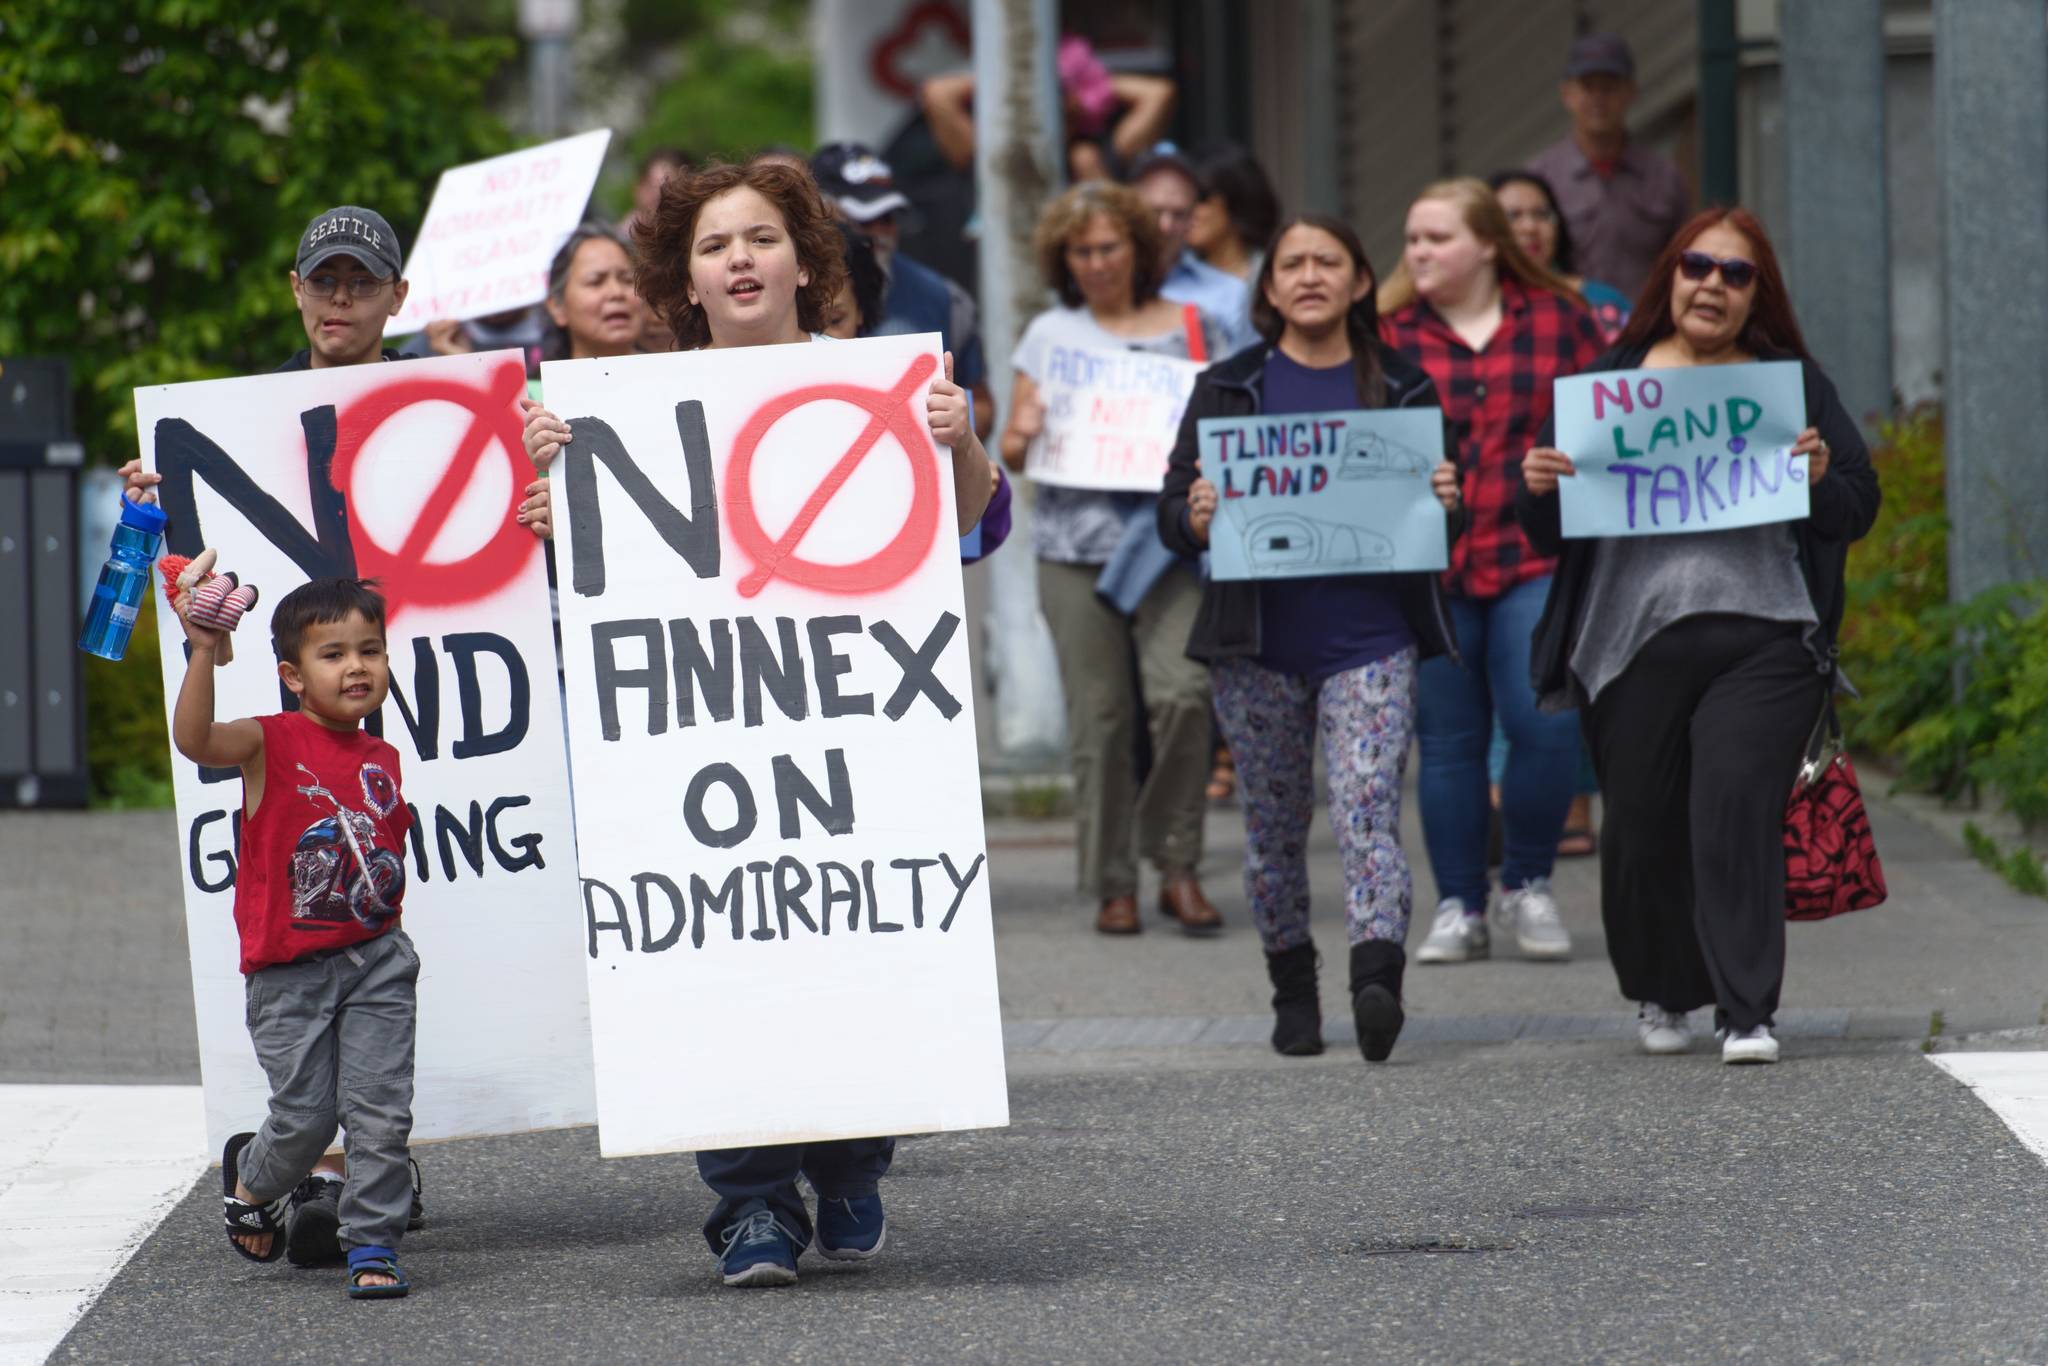 Small rally protests Juneau’s ‘landgrab’ of parts of Admiralty Island